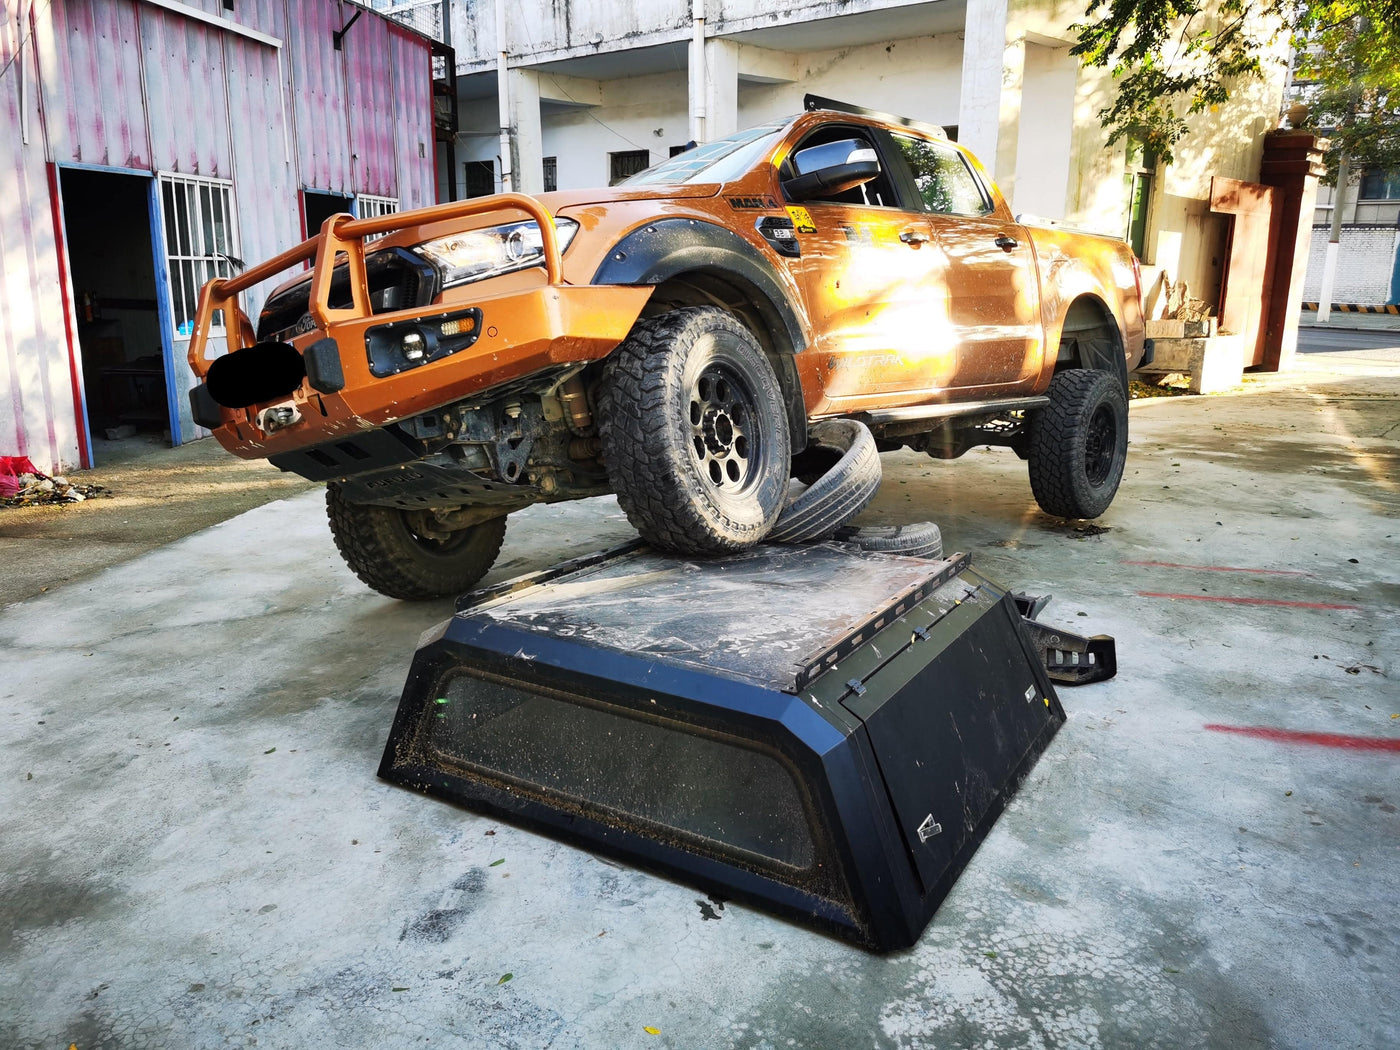 Amazon Steel Tub Canopy Suits Ford Ranger & Raptor